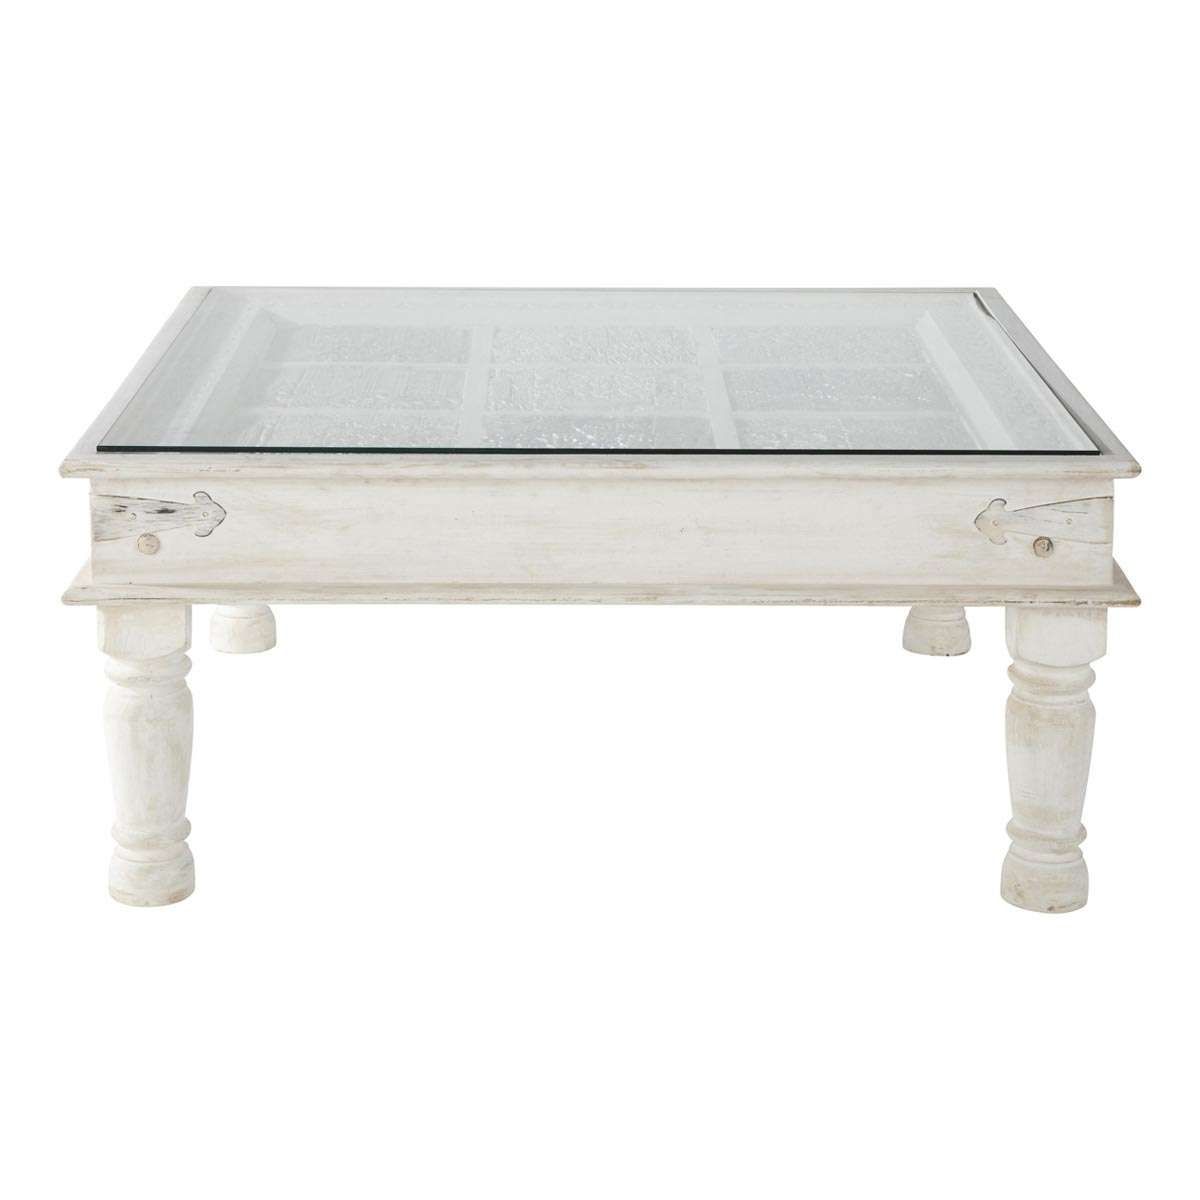 Well Known White Square Coffee Table Inside White Square Coffee Table Tables With Glas / Thippo (Gallery 20 of 20)